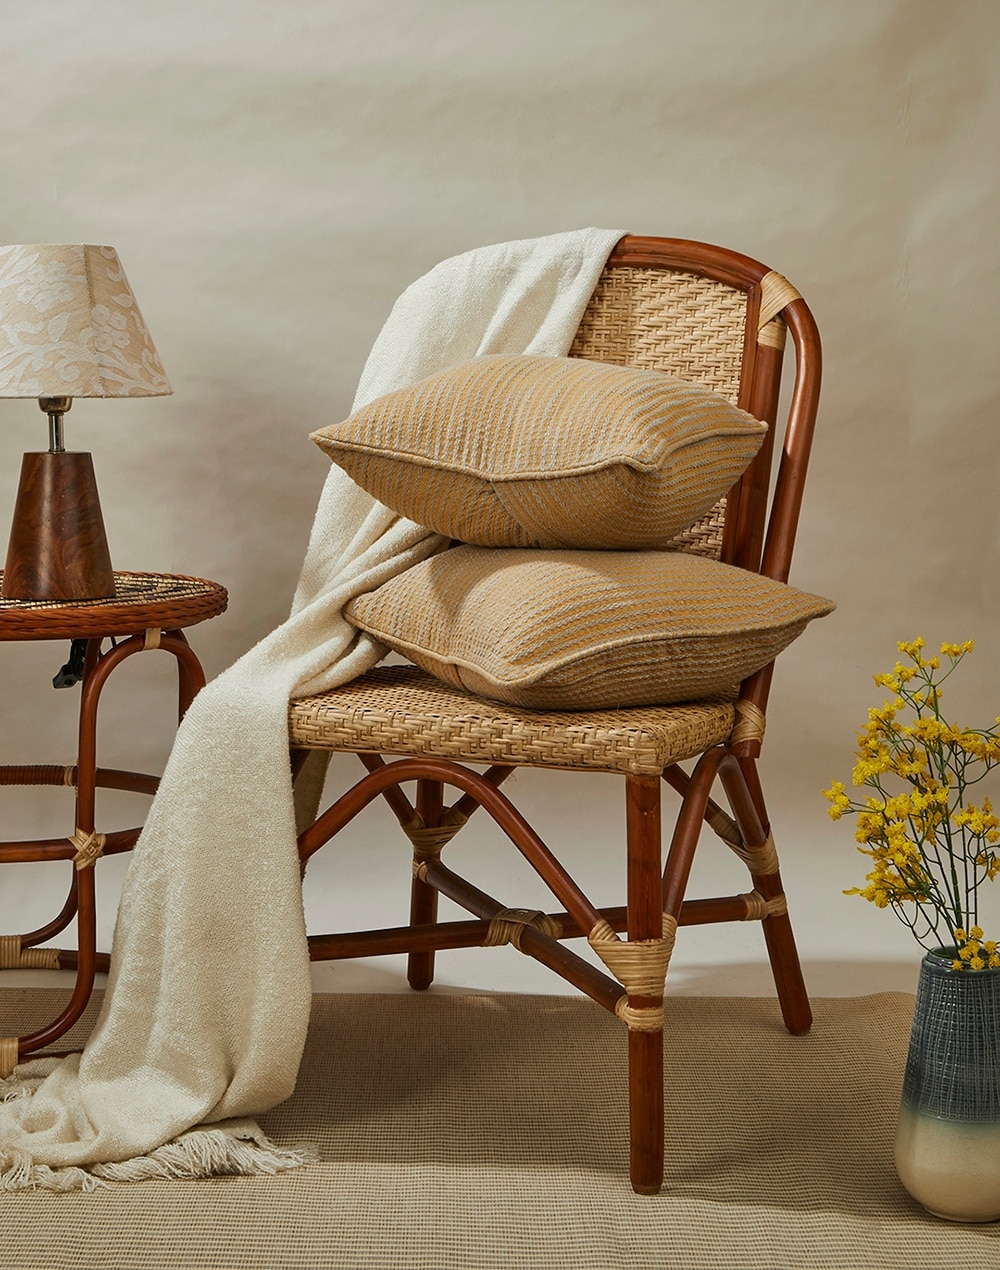 Buy Chair Pads, Cushion Seat Online at Fabindia